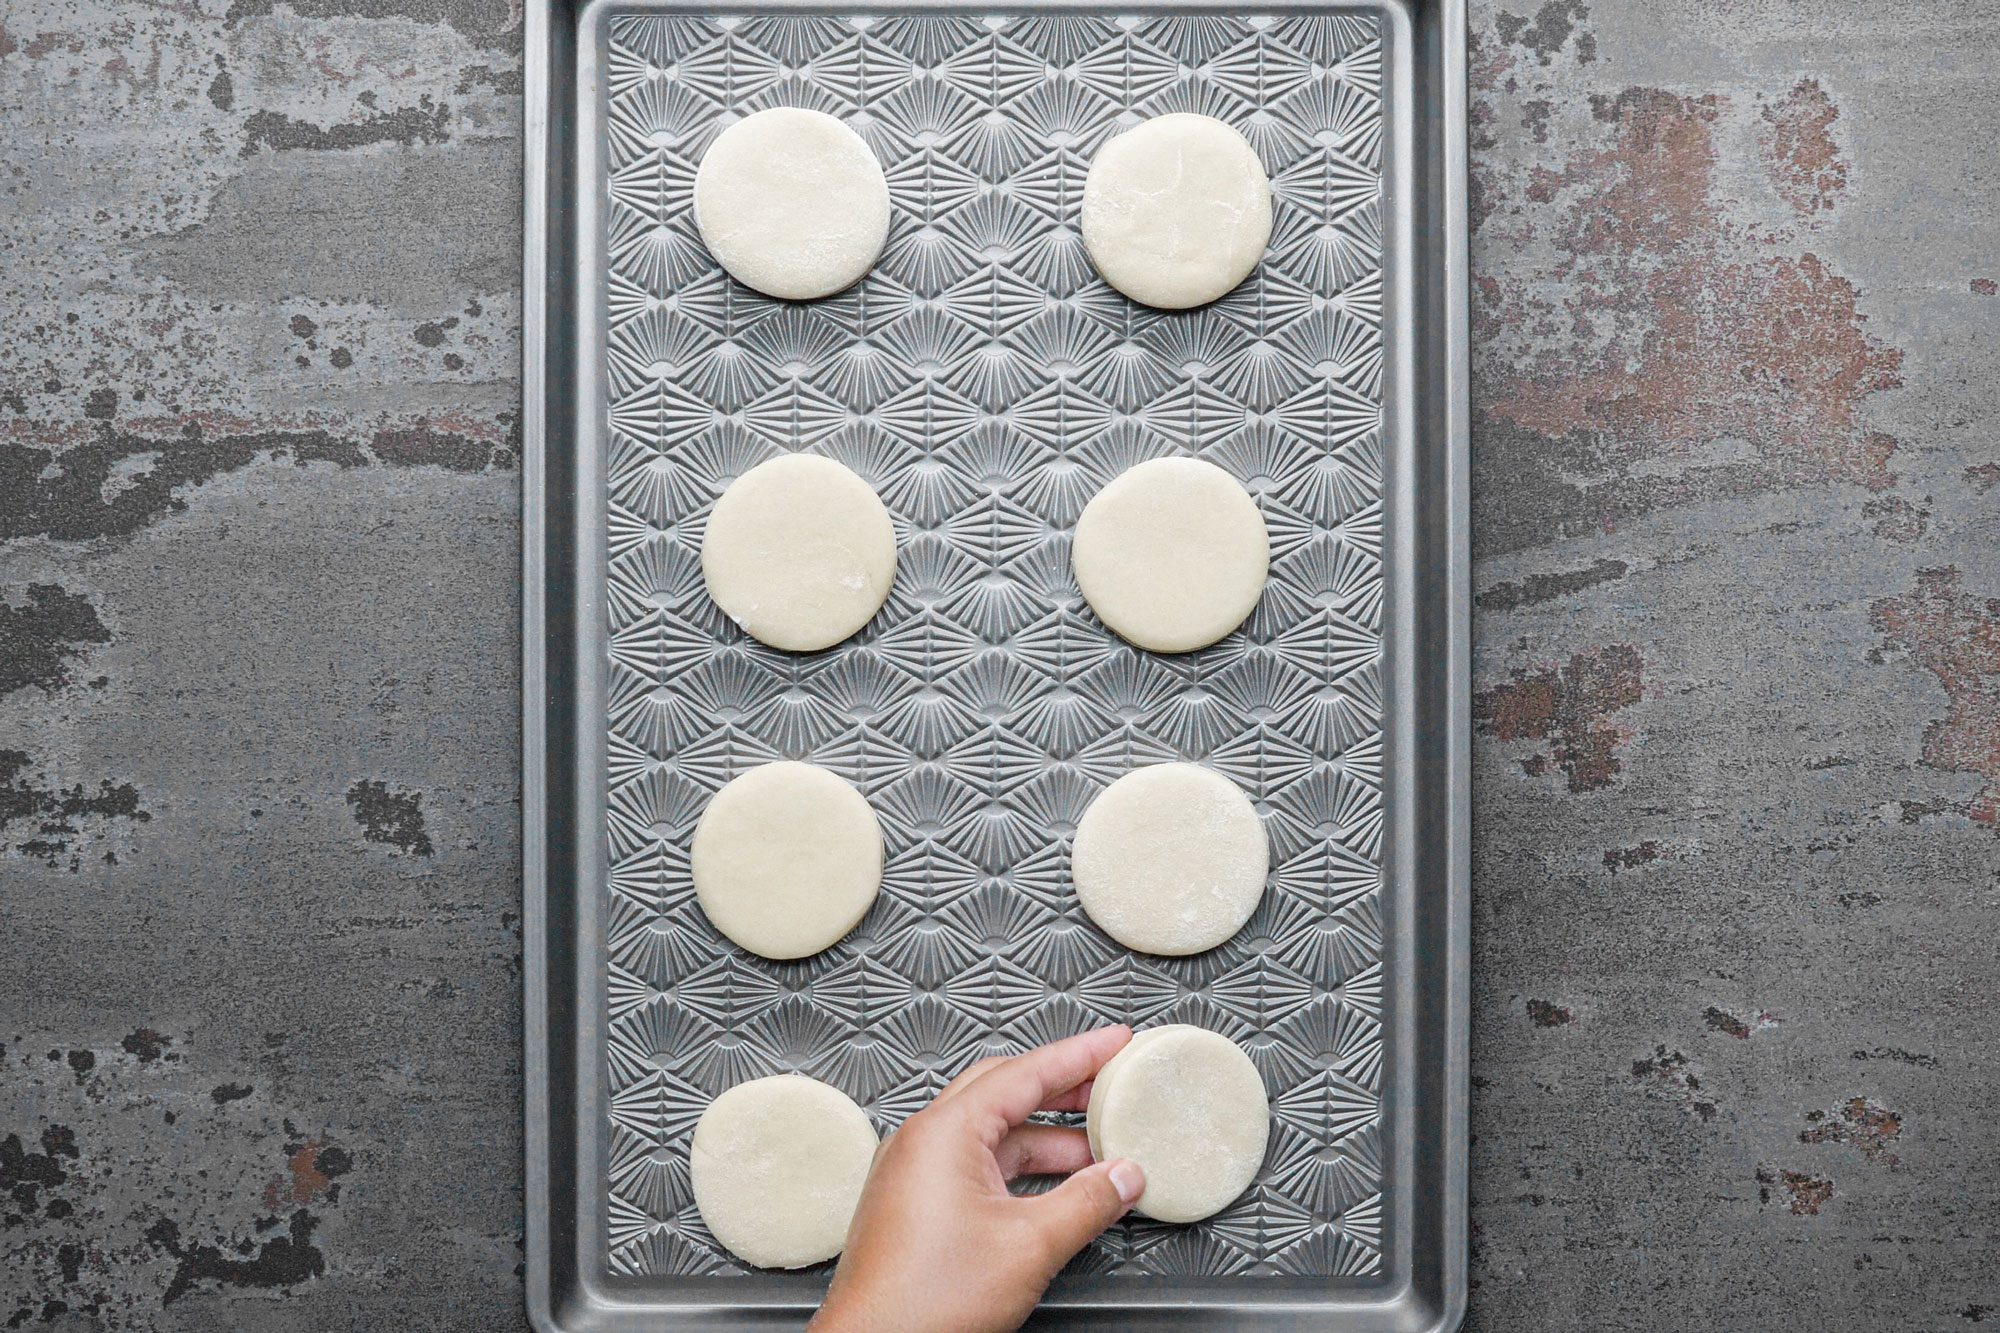 small round shaped dough pieces placed on a baking tray